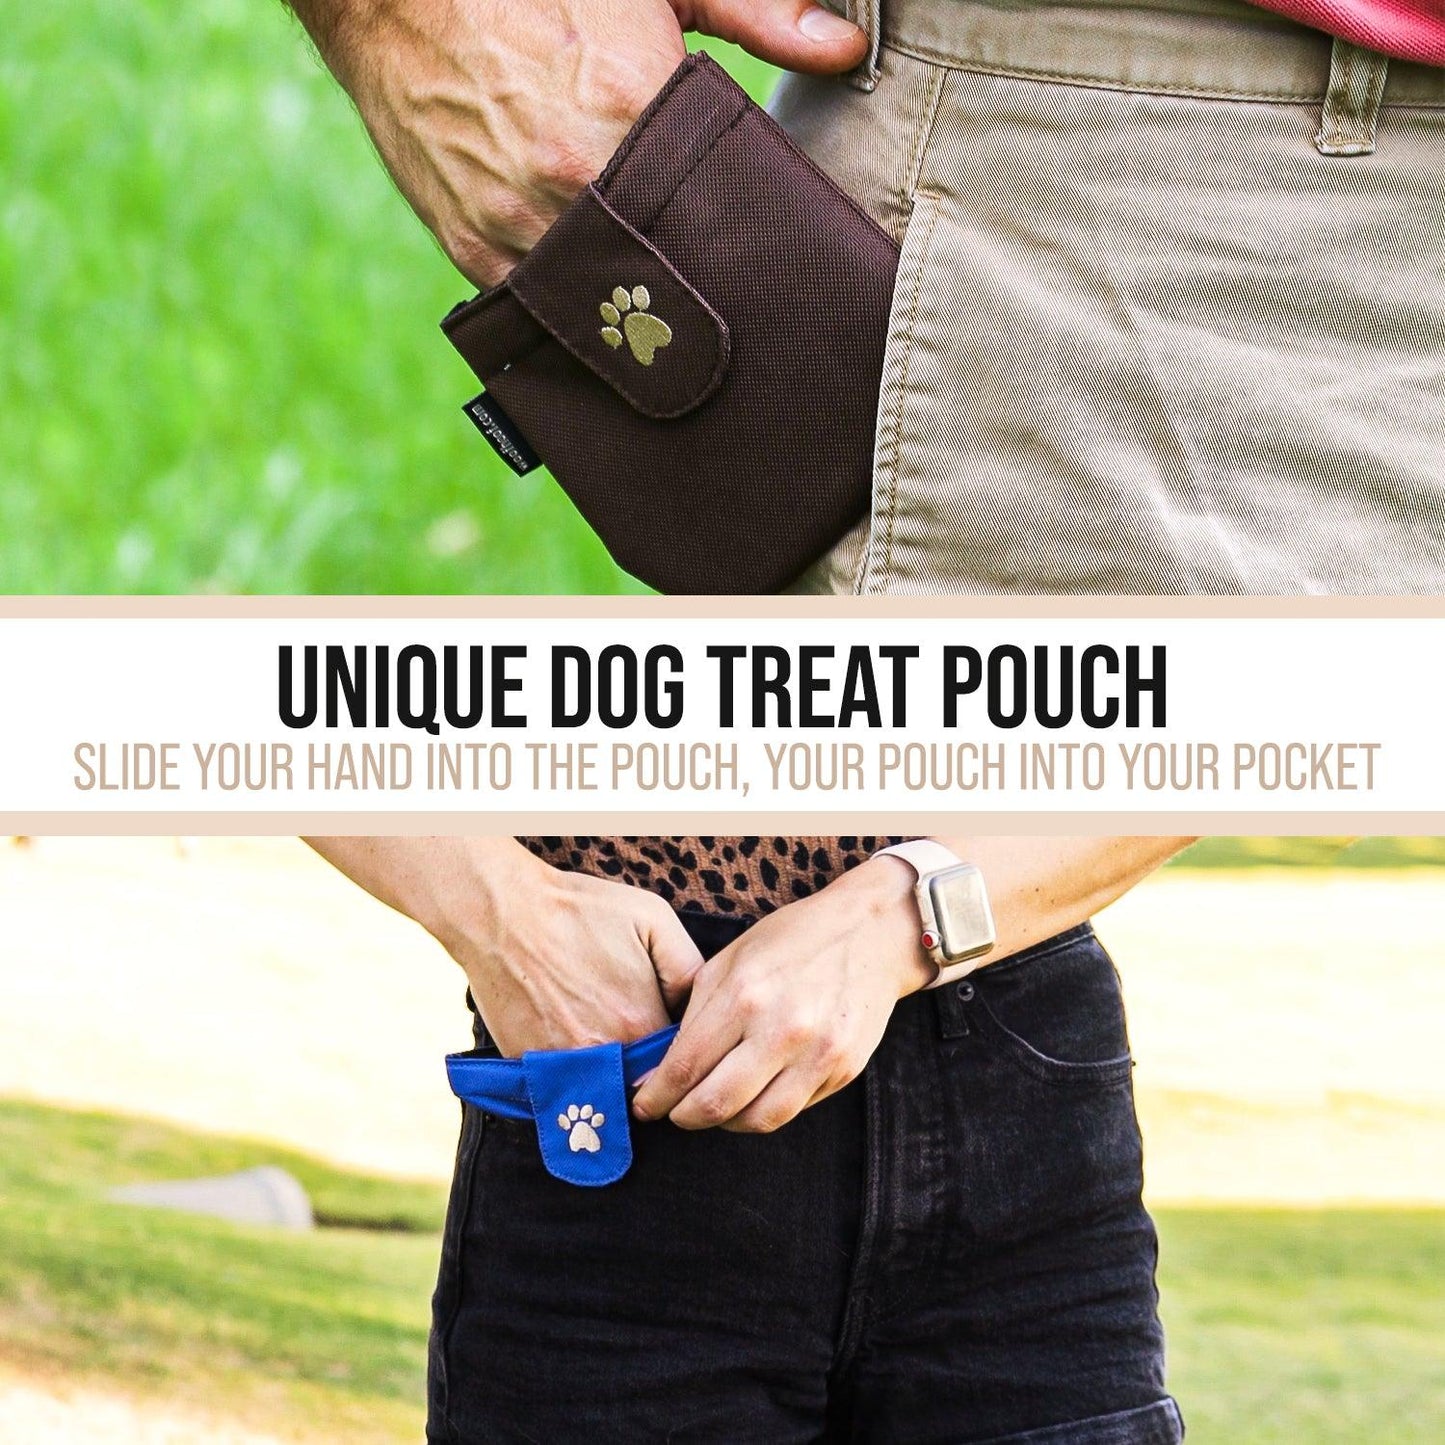 Brown and Blue dog pocket treat pouches with instructions